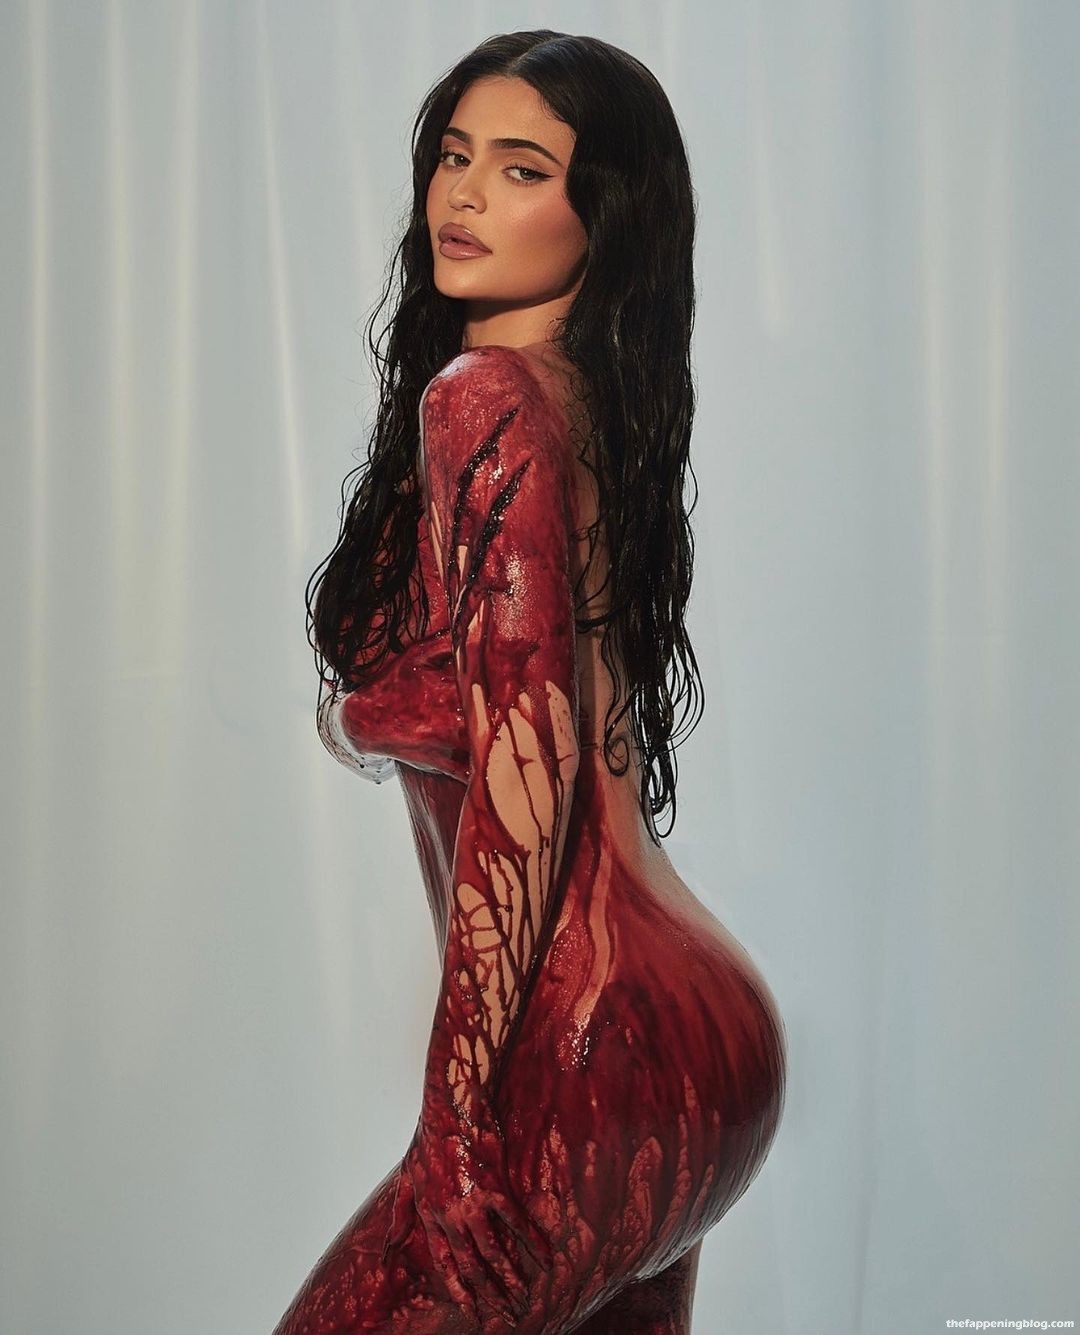 Kylie-Jenner-Photo-Collection-3-thefappeningblog.com_.jpg